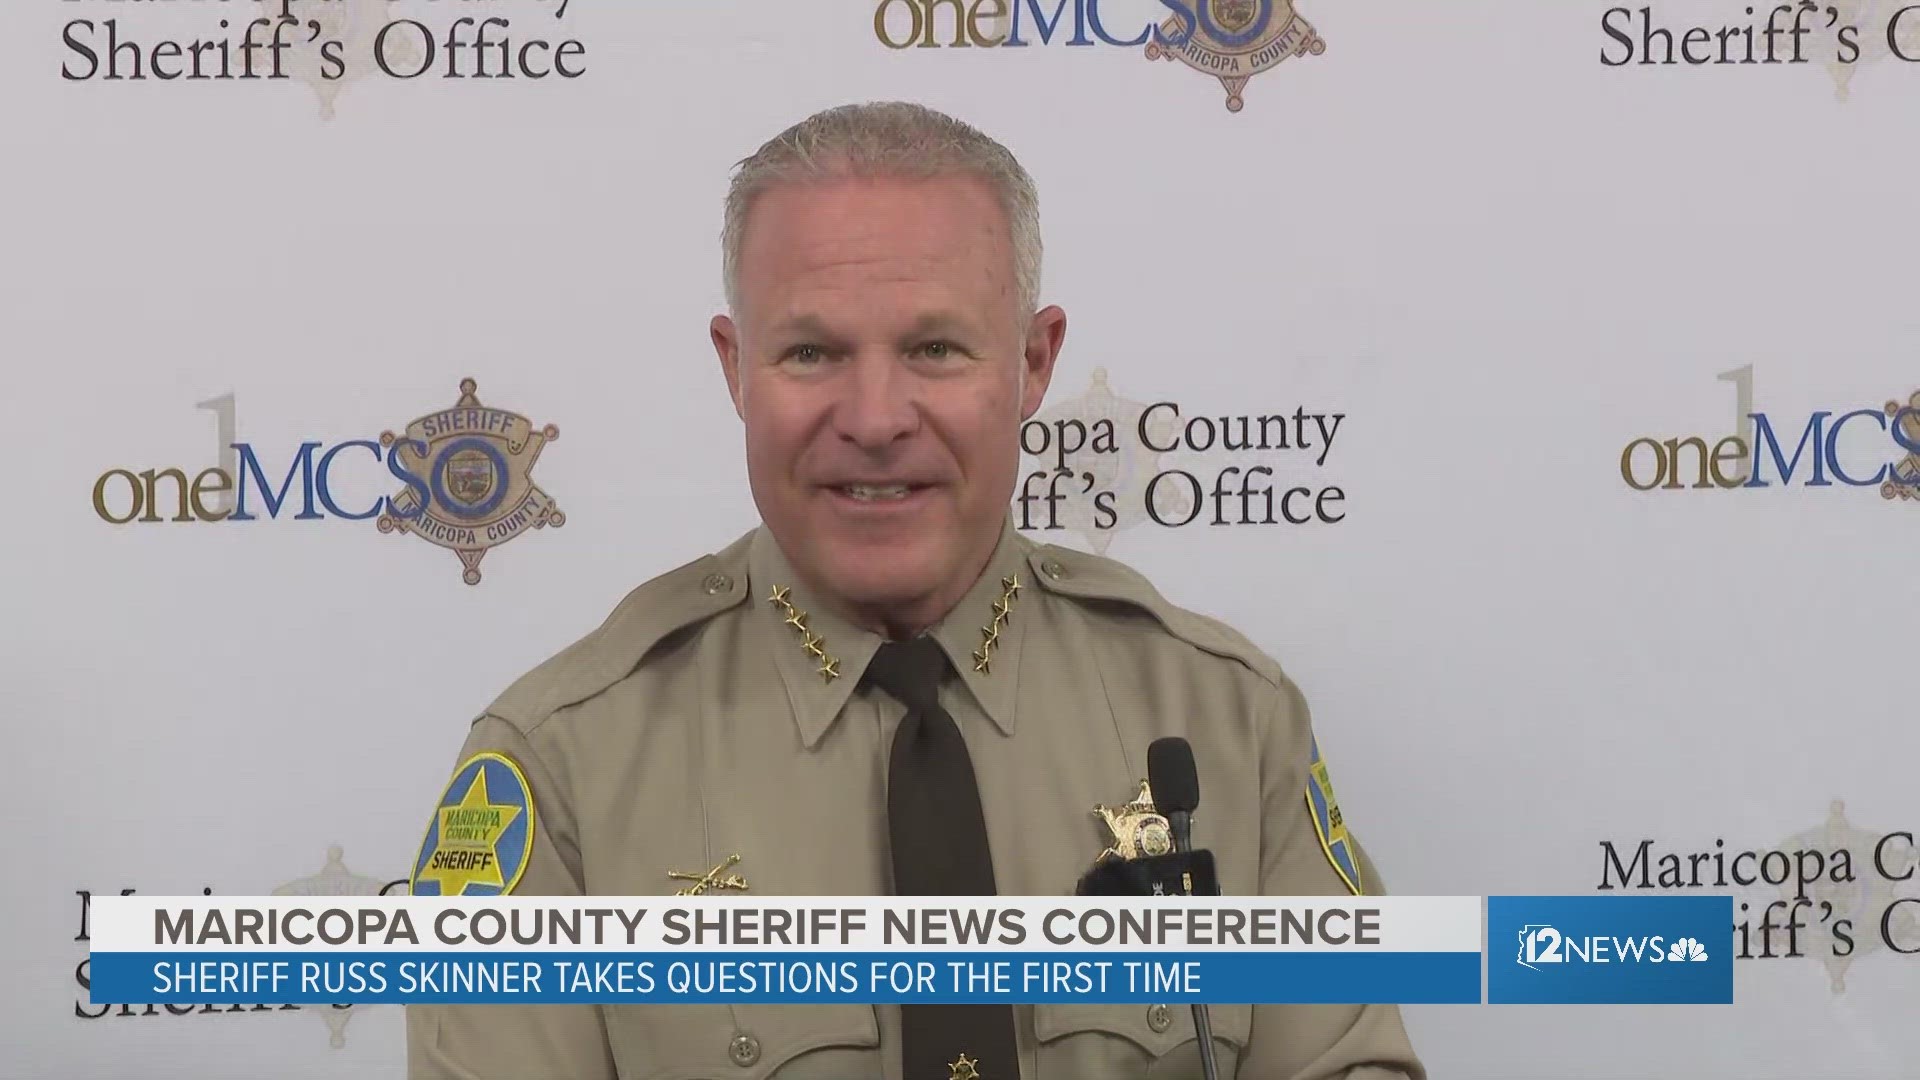 Skinner was recently selected to replace Paul Penzone after the former sheriff resigned.